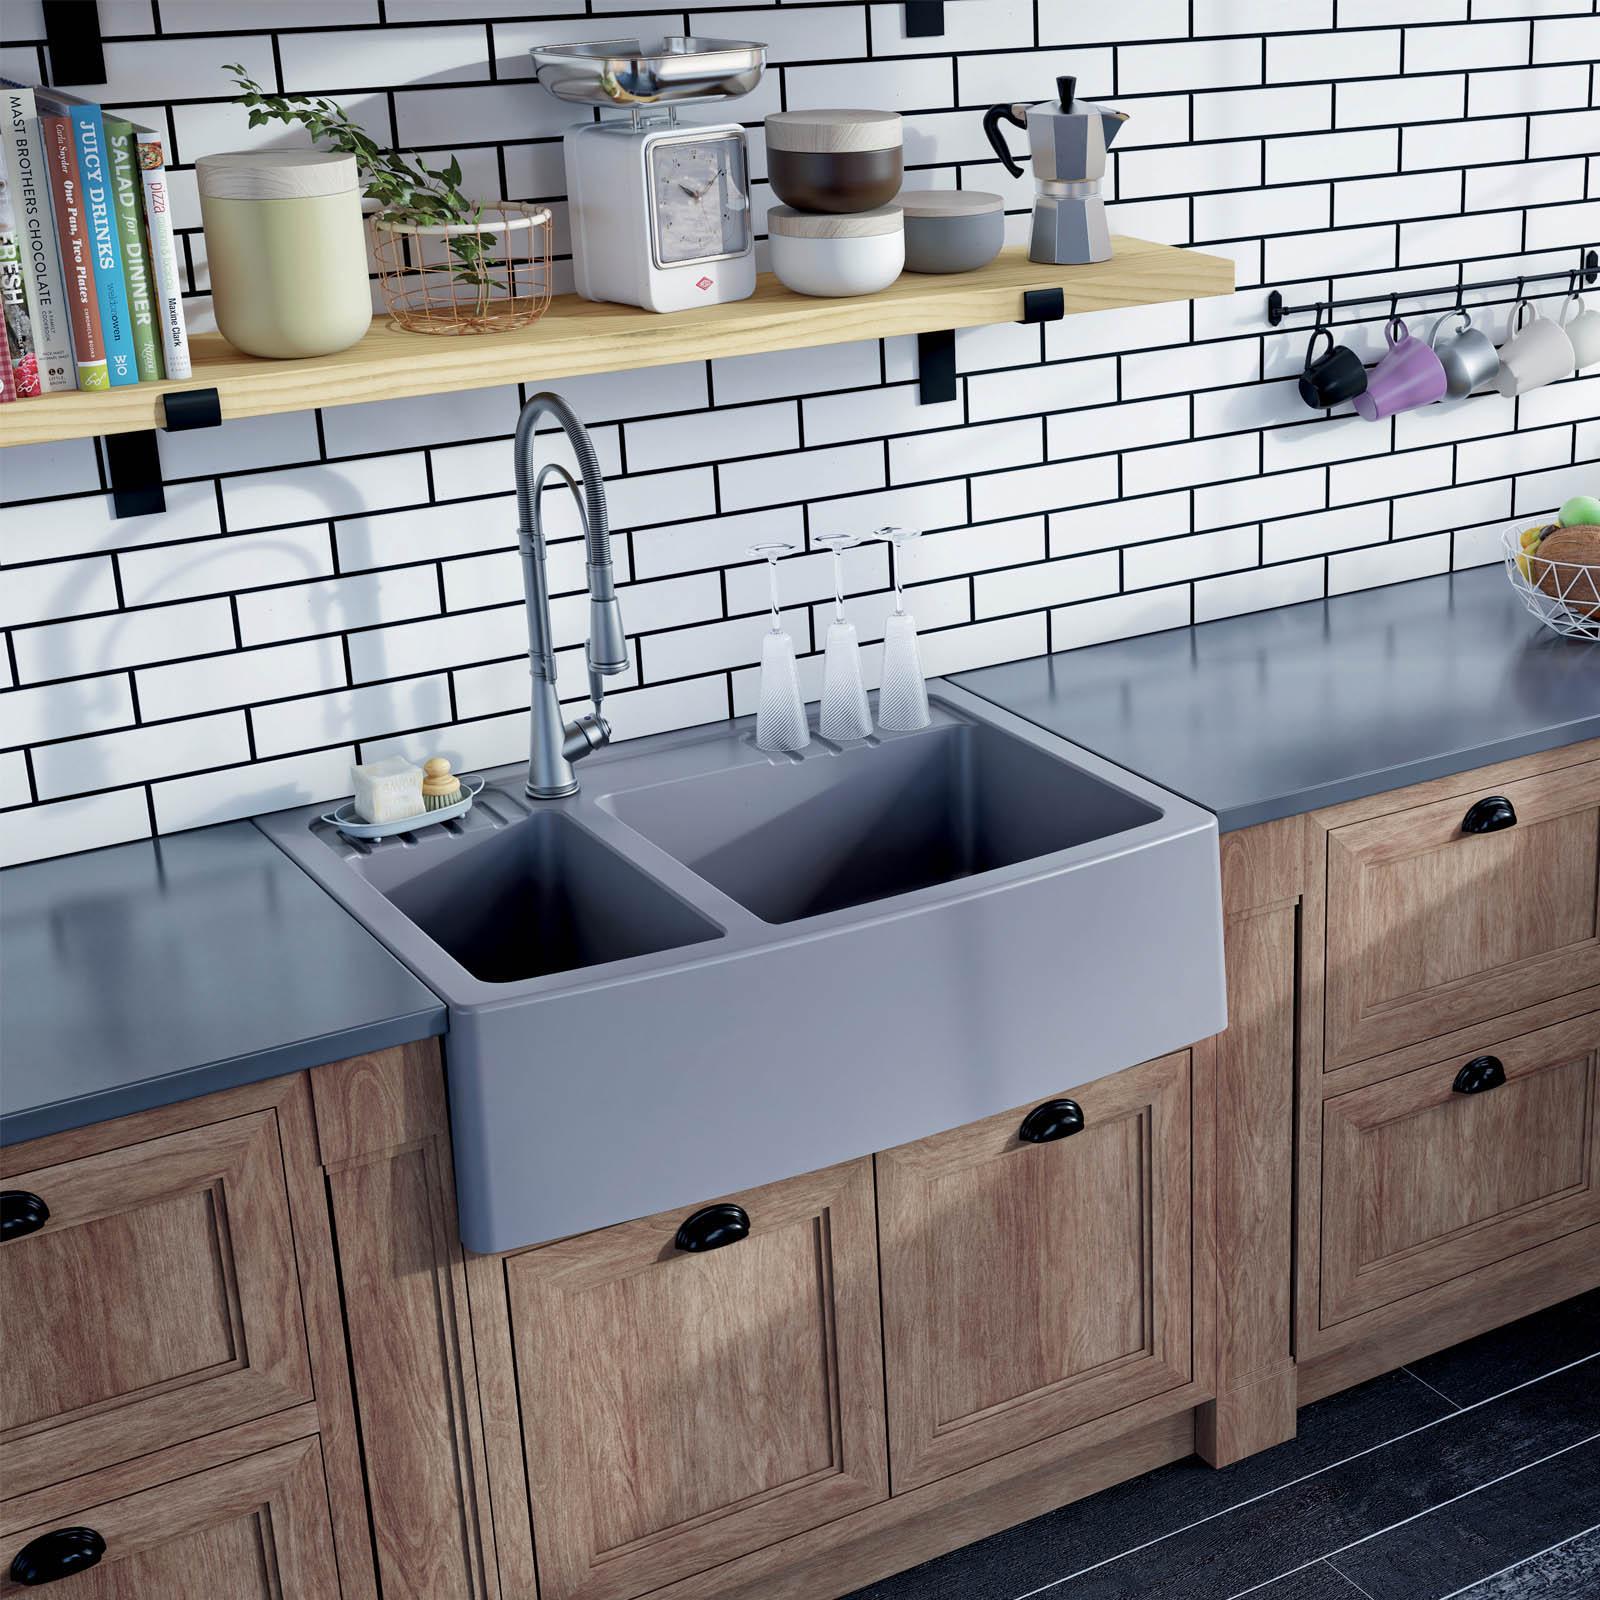 High-quality sink Clotaire III granit titanium - one and a half bowl - ambience